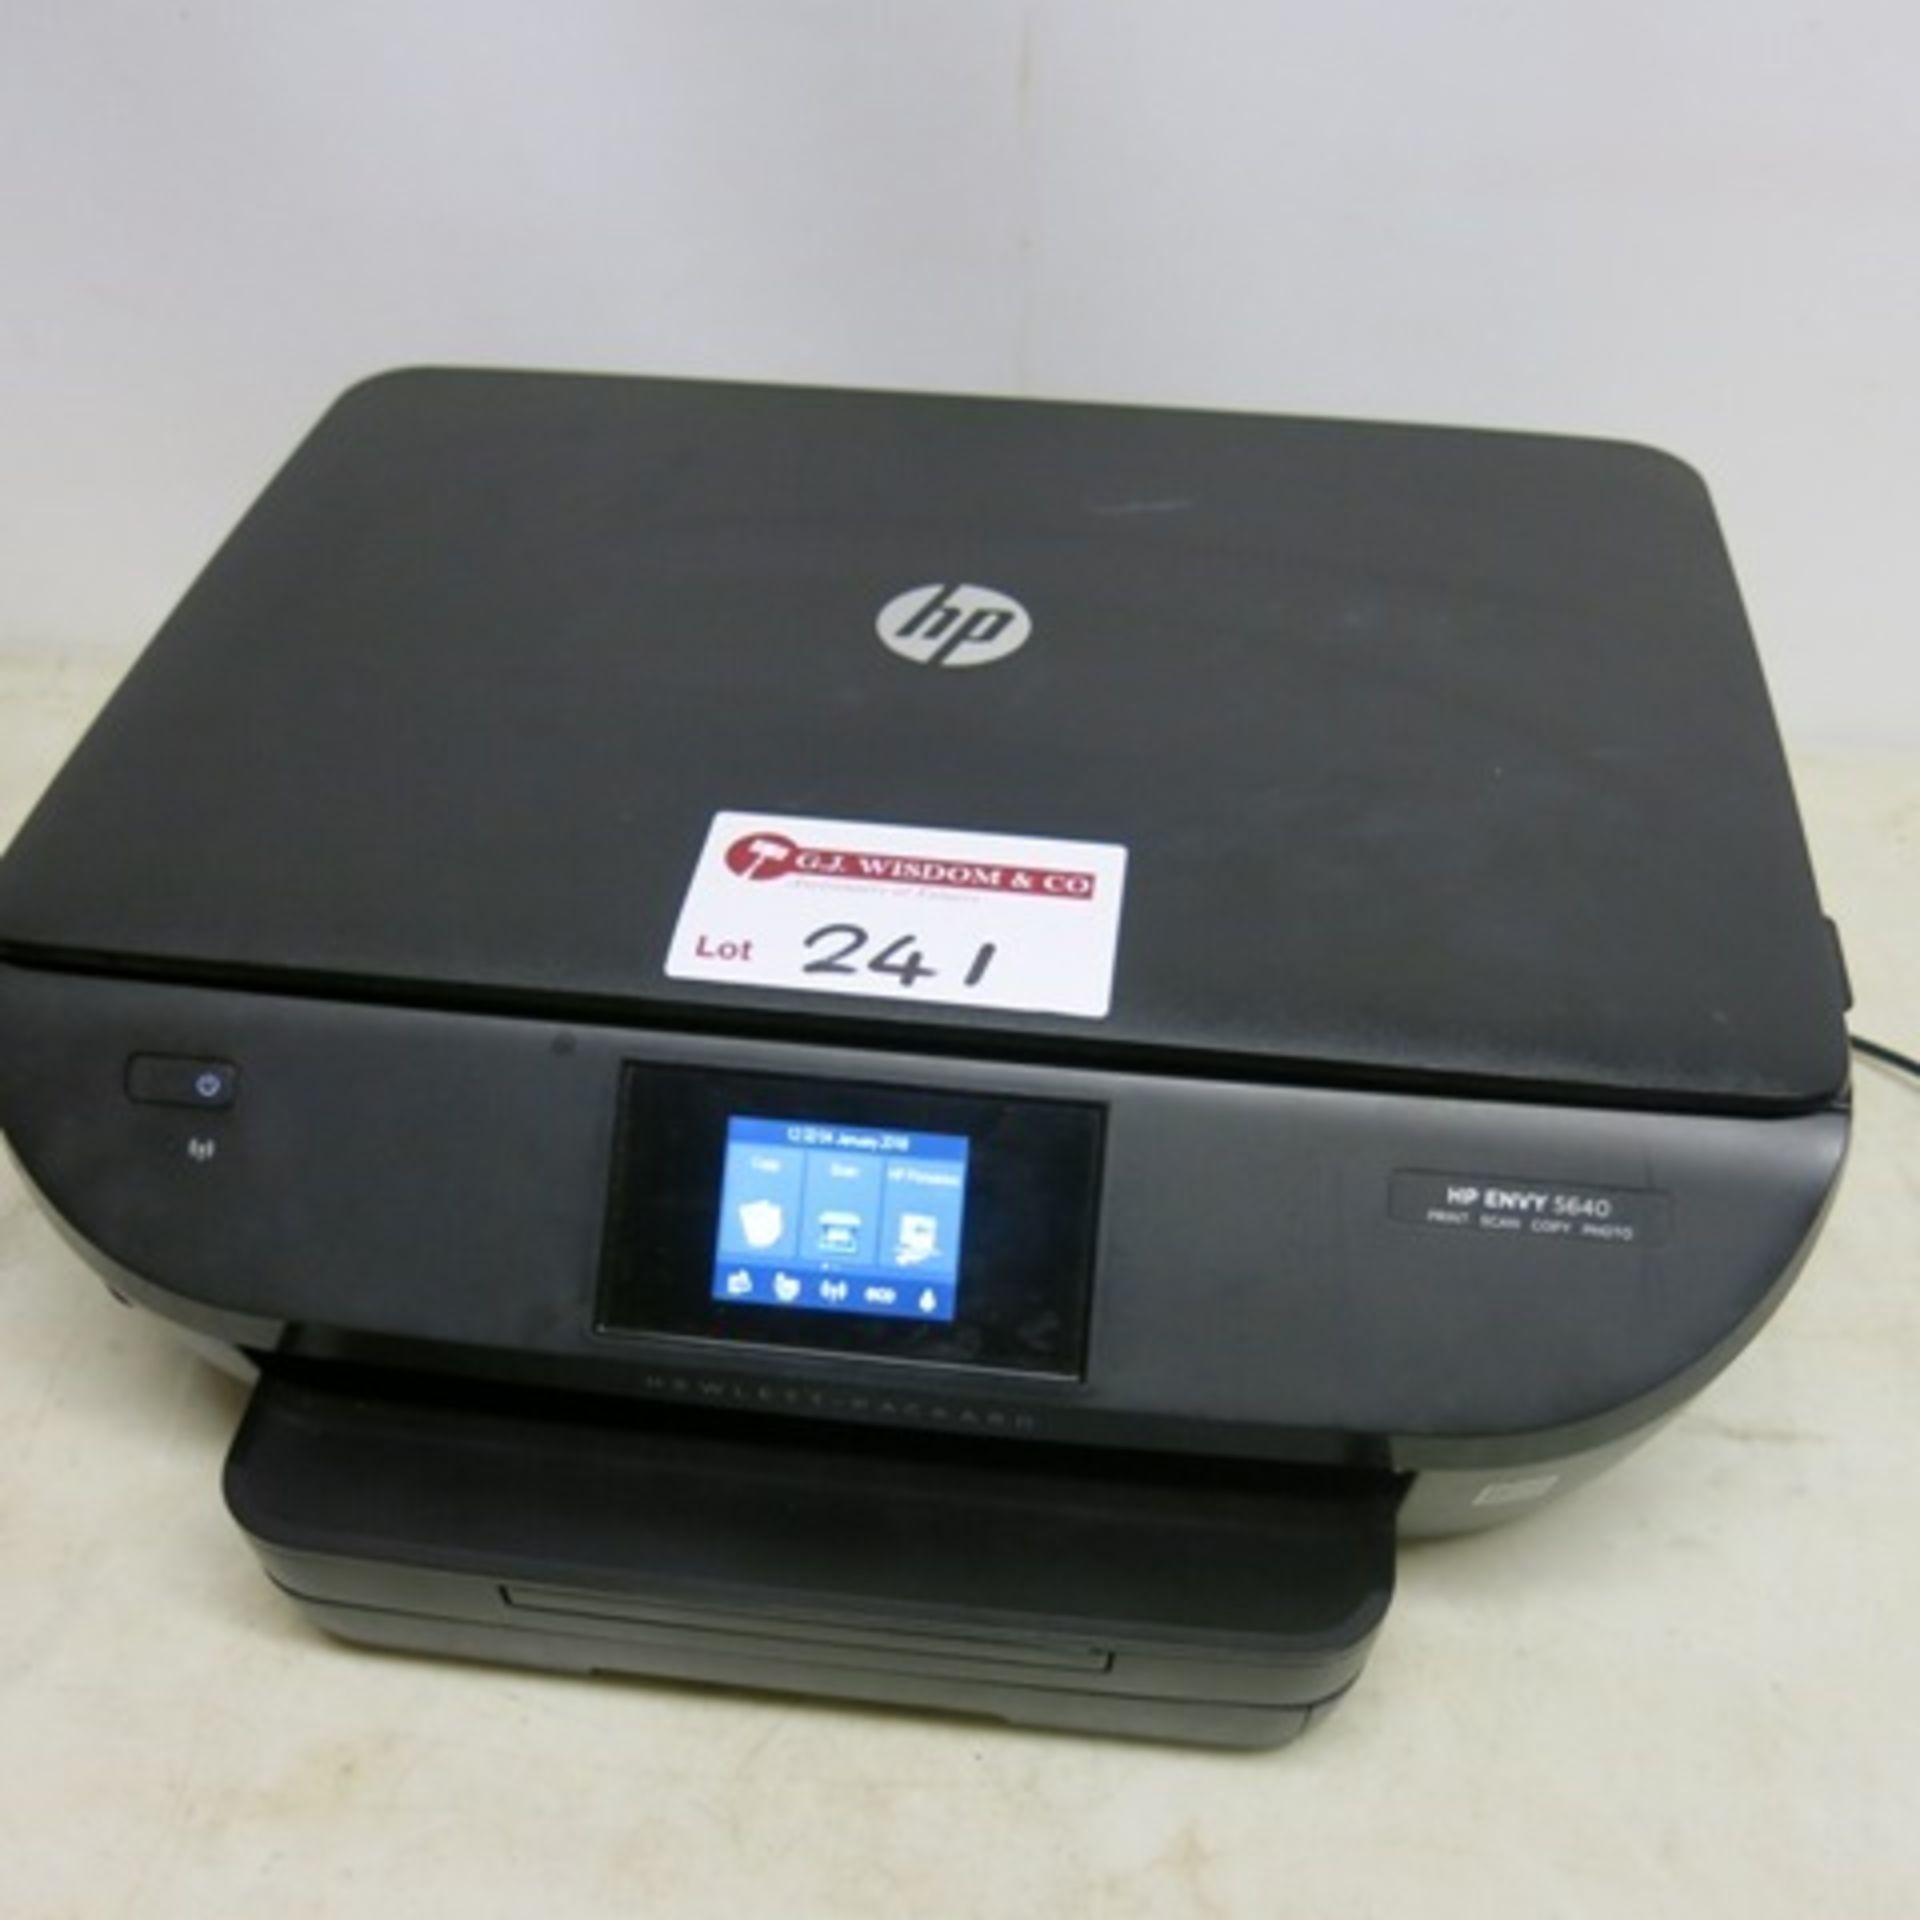 HP Envy 5640 All In One Printer with Power Supply